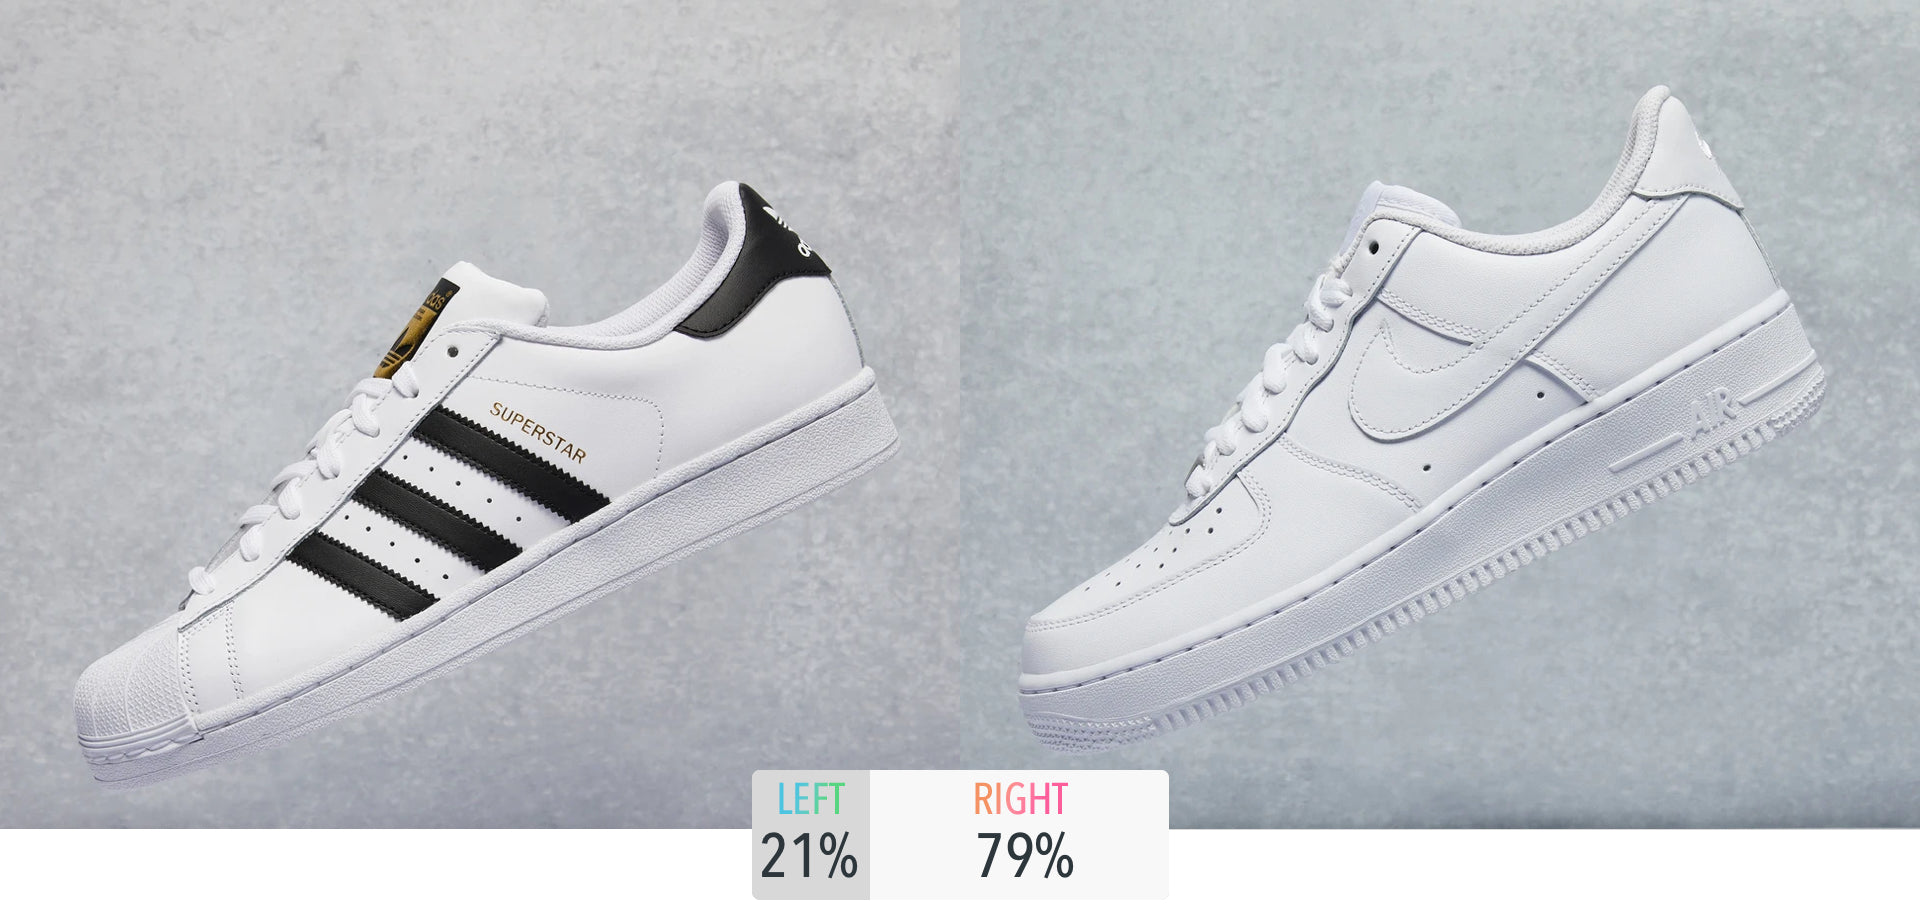 nike air force one vs adidas superstar